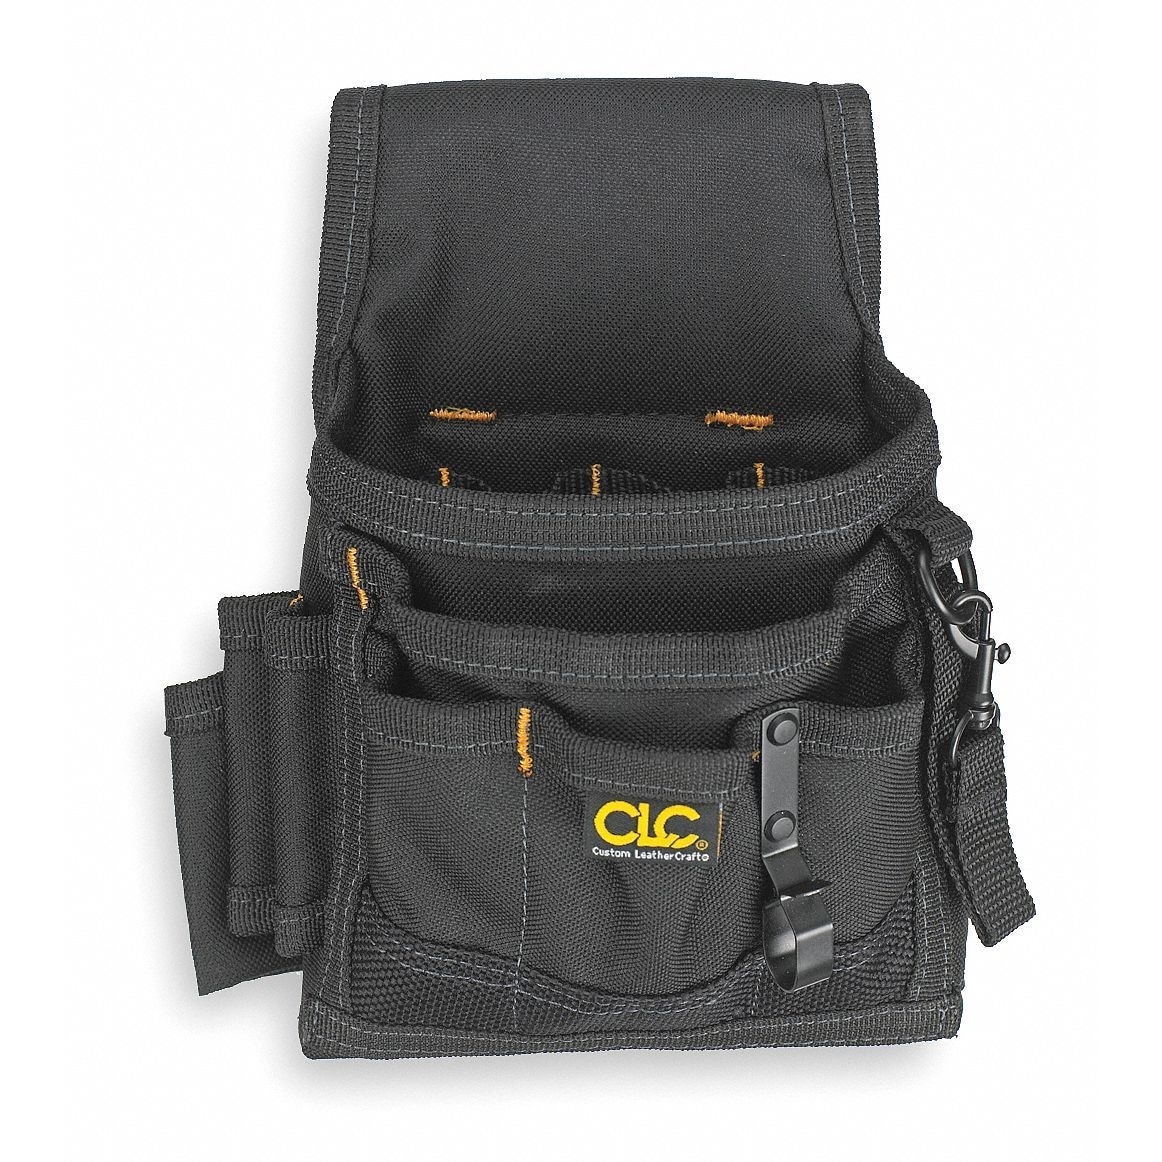 Clc Work Gear Black,Tool Pouch,Polyester 1503 - 1 Each